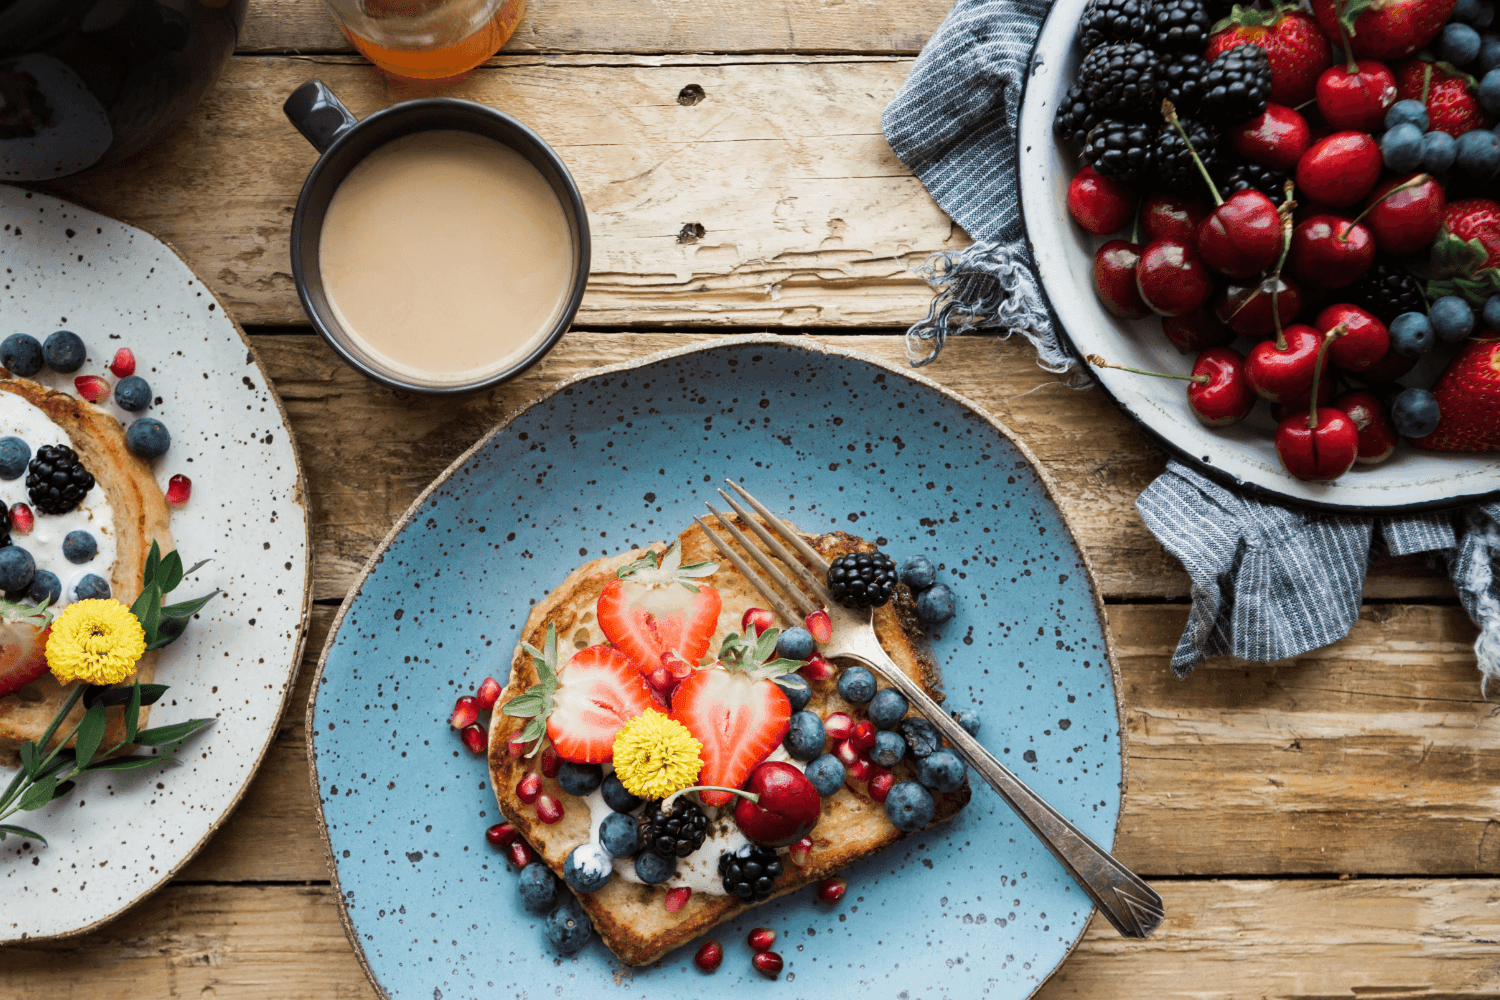 wooden table with cup of tea, blue plates, bowl with berries and toast with berries on top.